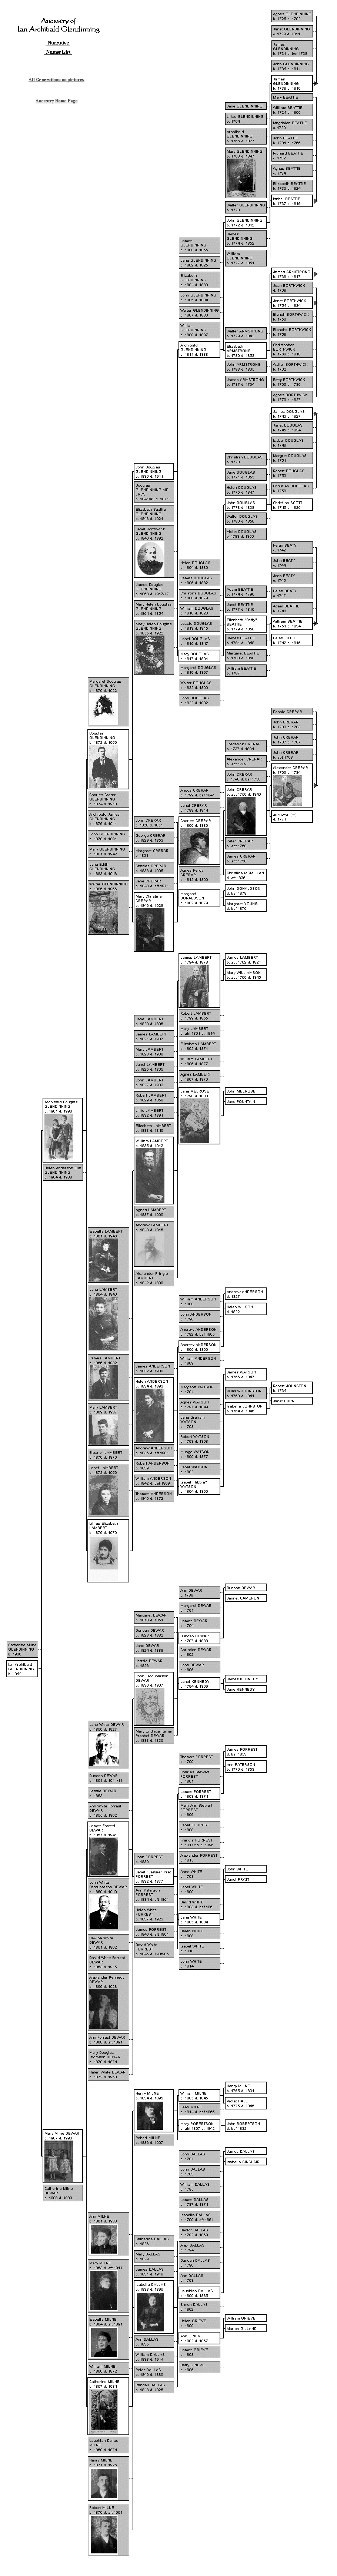 Part Family Tree with Pictures